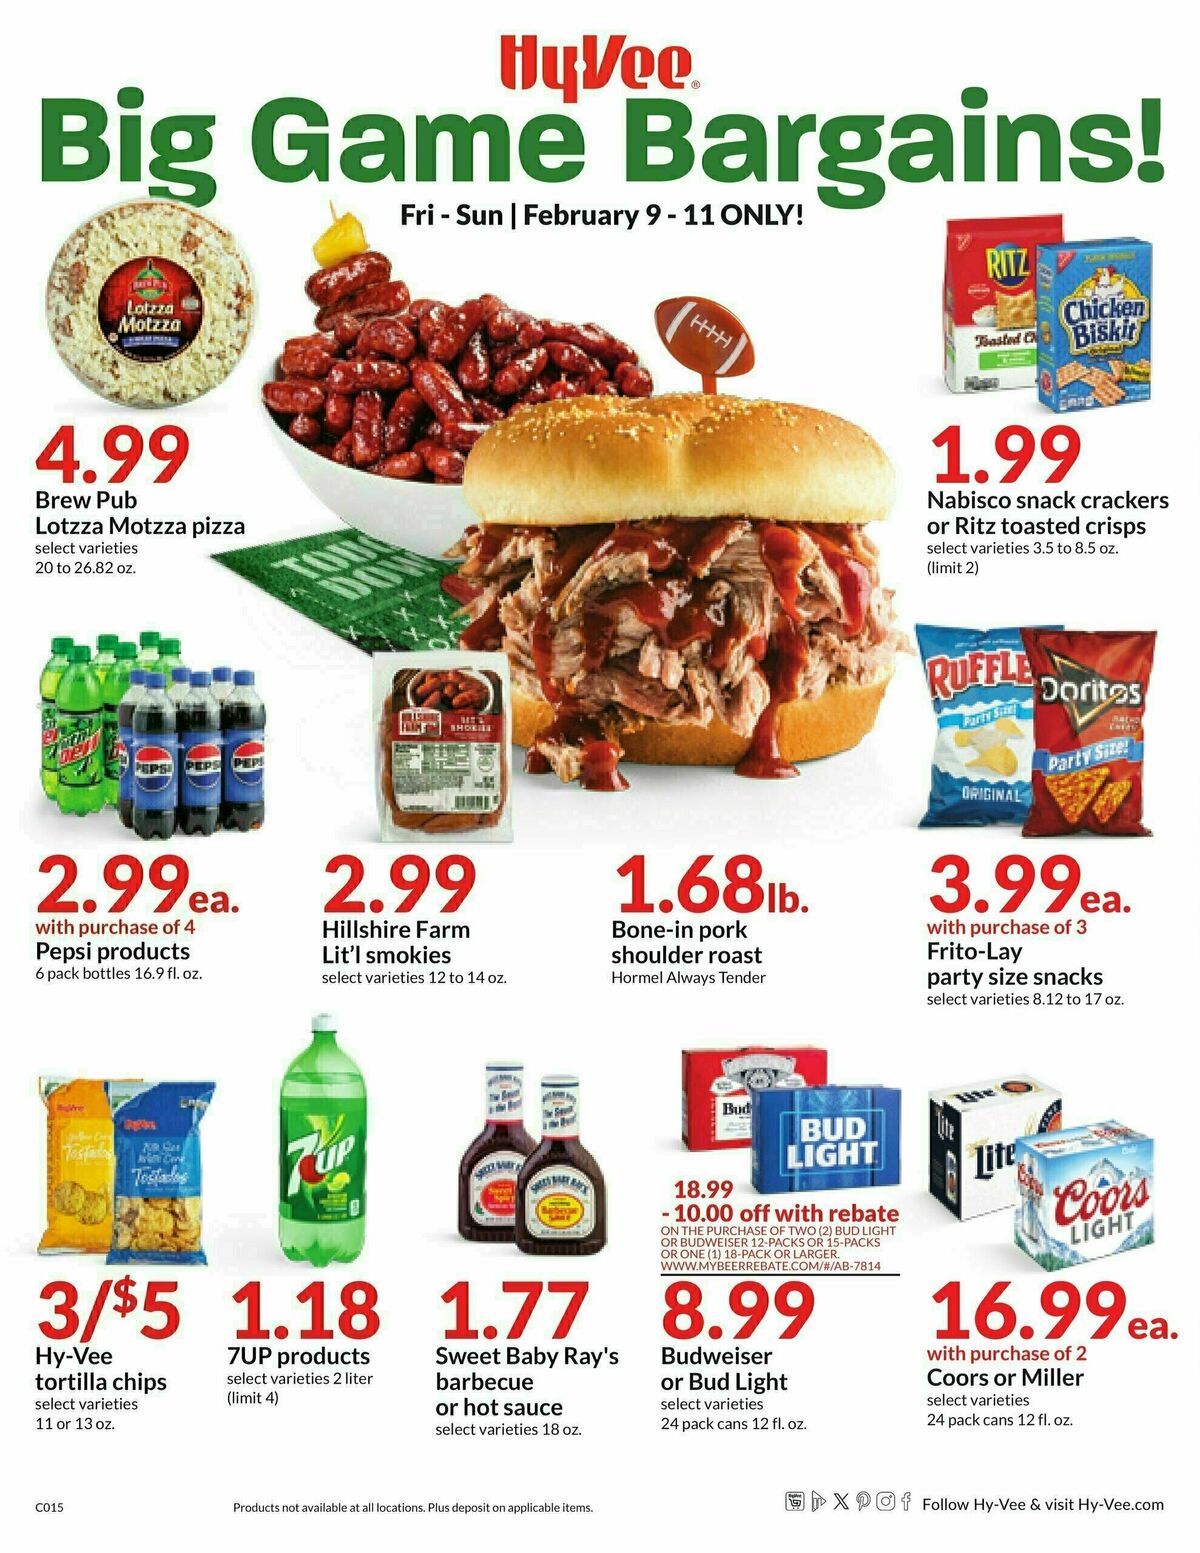 Hy-Vee Big Game Bargains! Weekly Ad from February 9